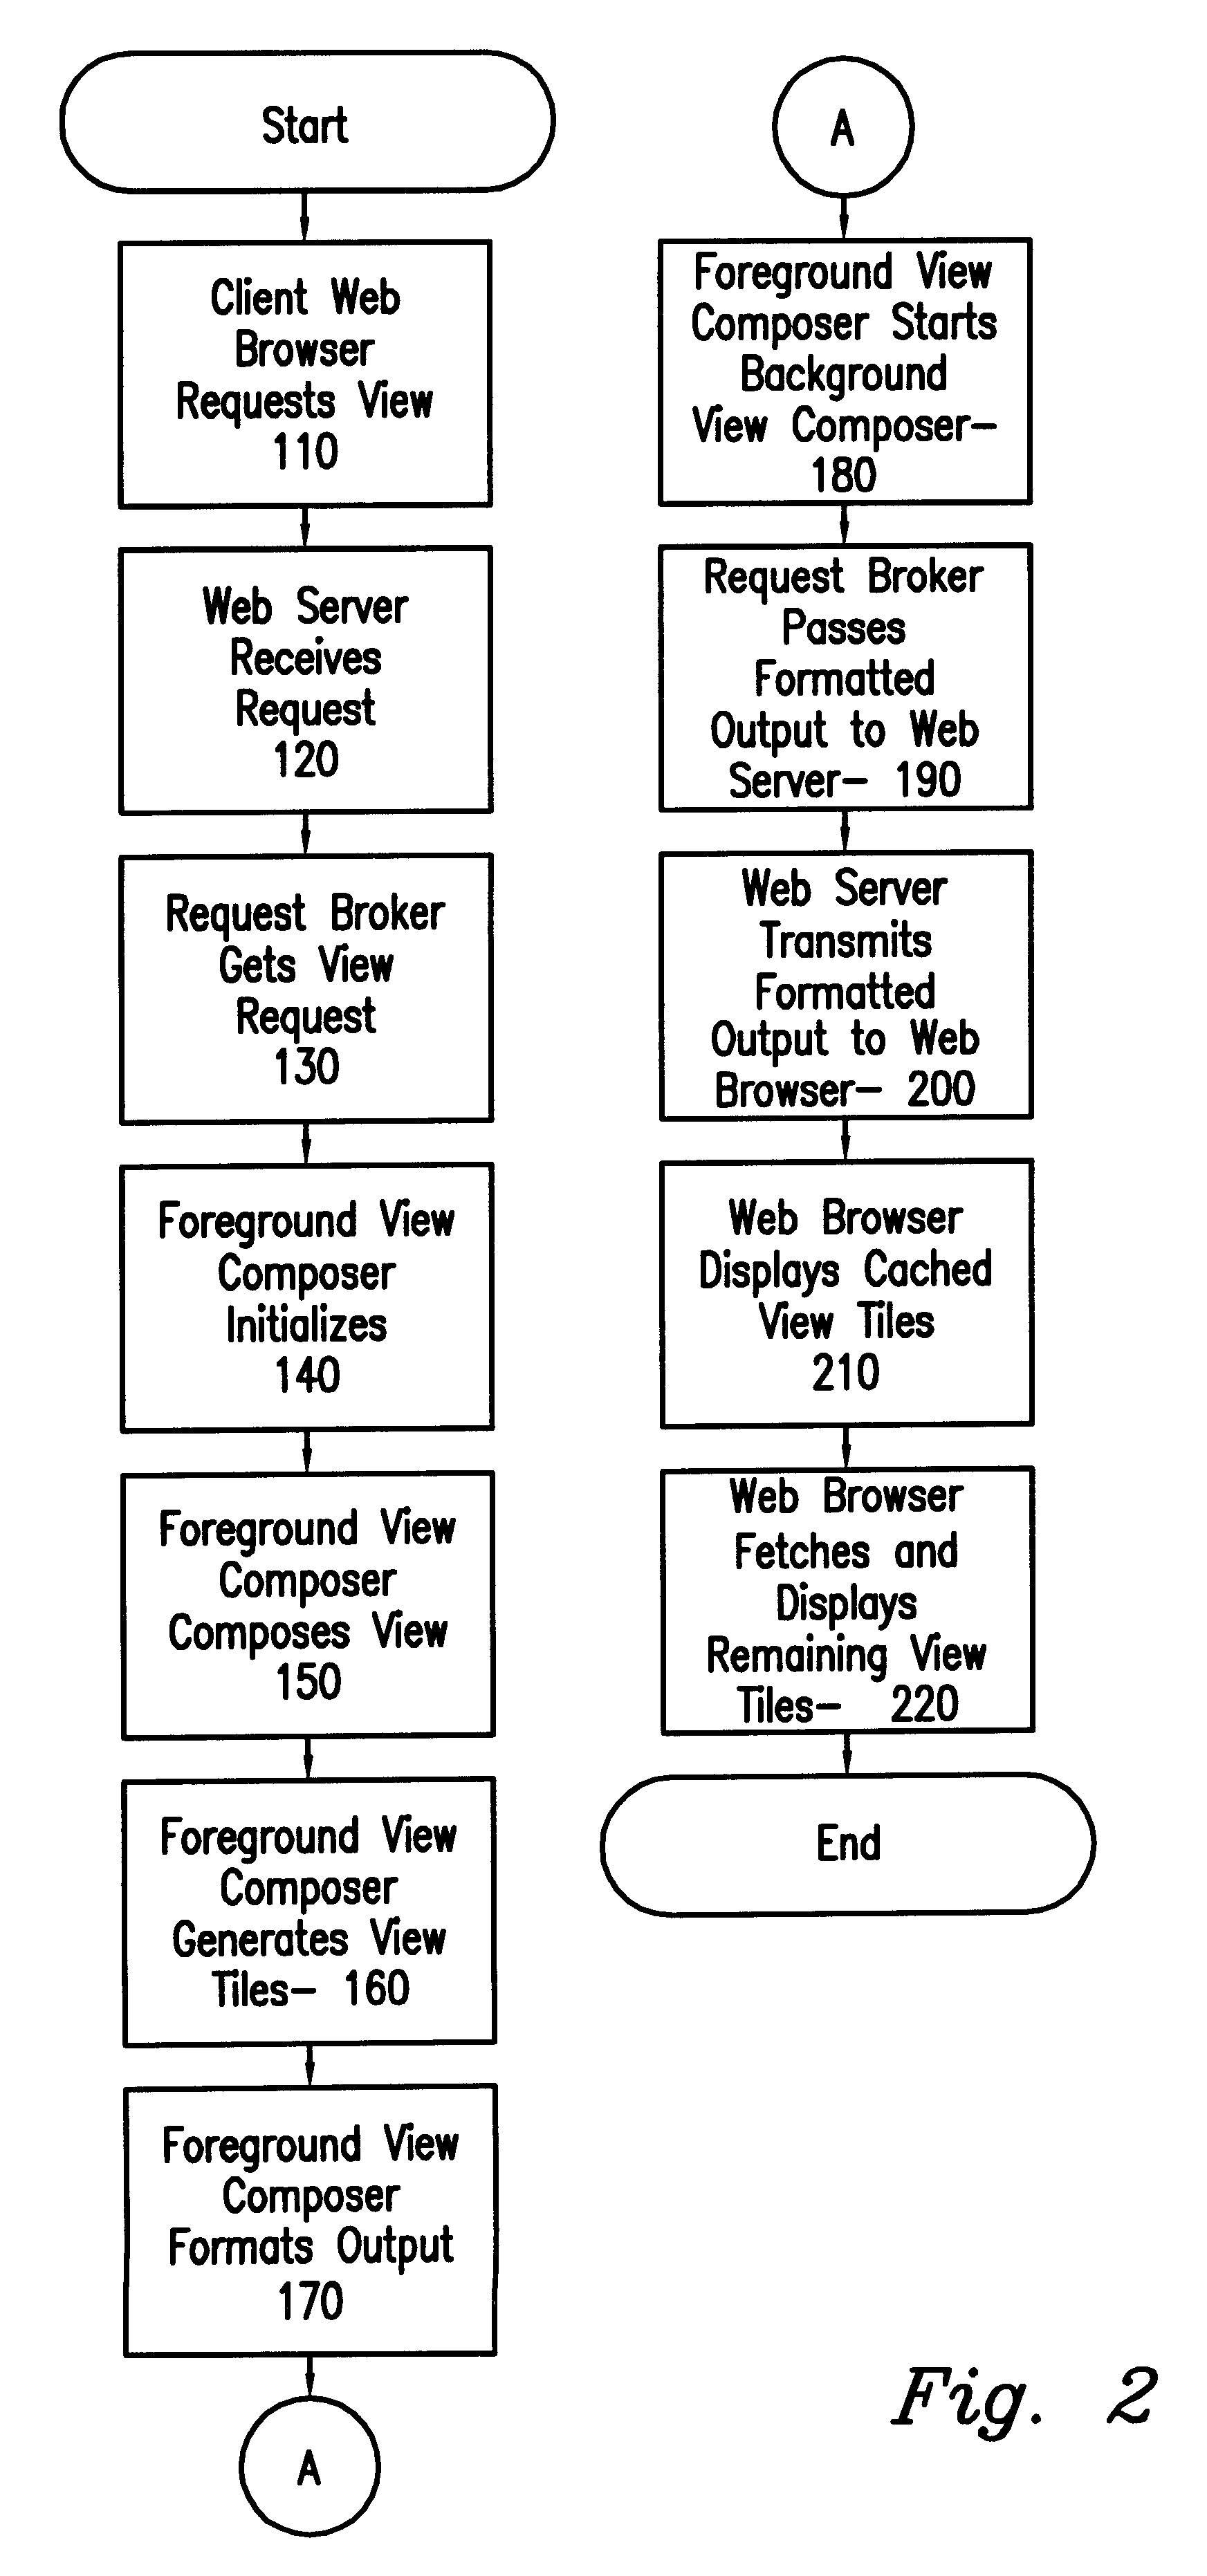 Network image view server using efficient client-server tiling and caching architecture